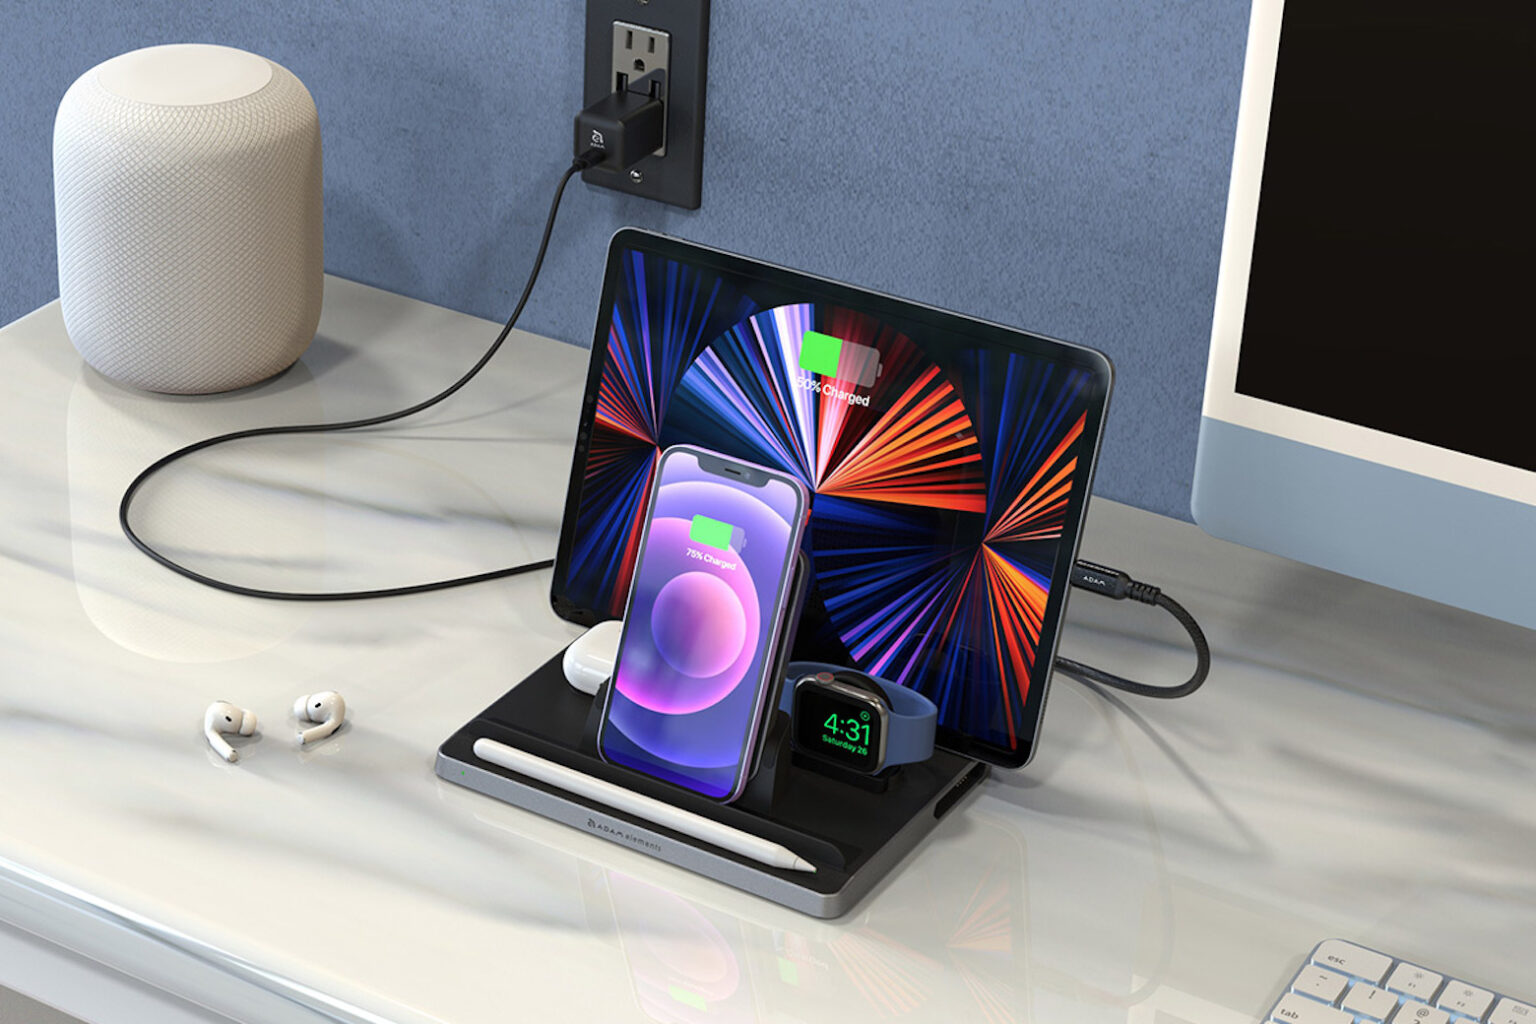 Add 5-in-1 wireless charging station to your iOS family.